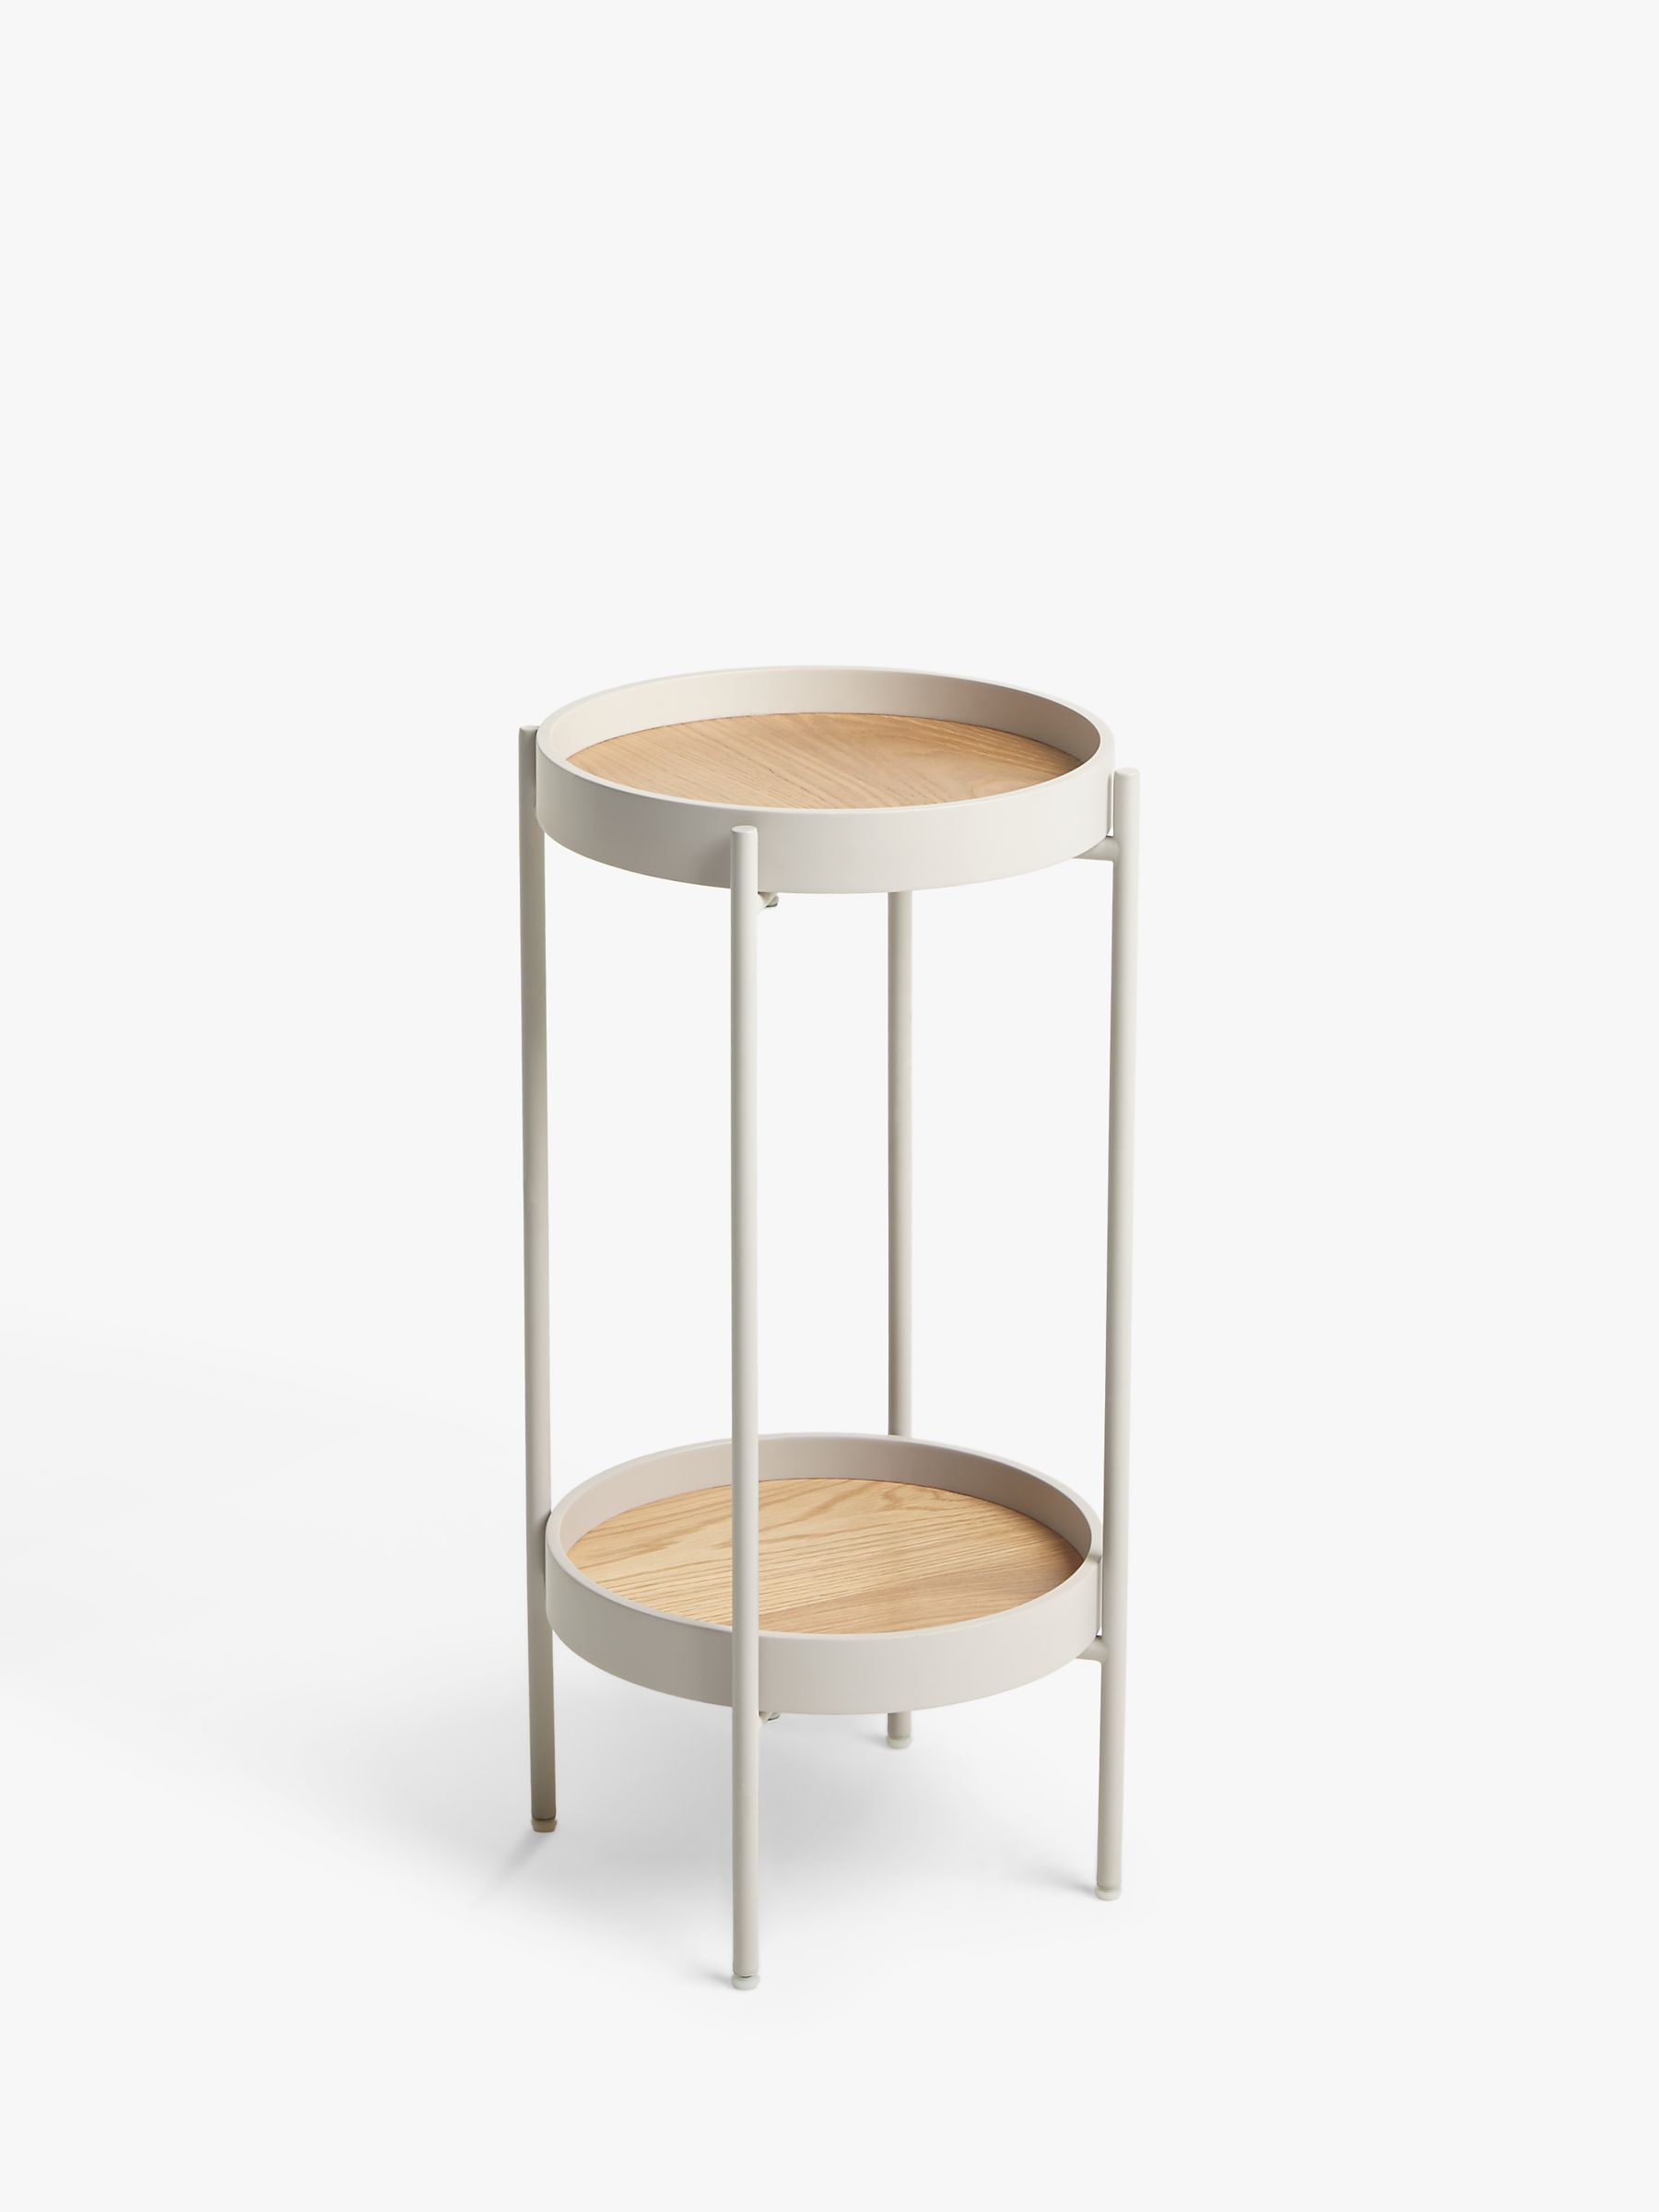 Side Tables John Lewis Partners, Tall Round Side Table Uk